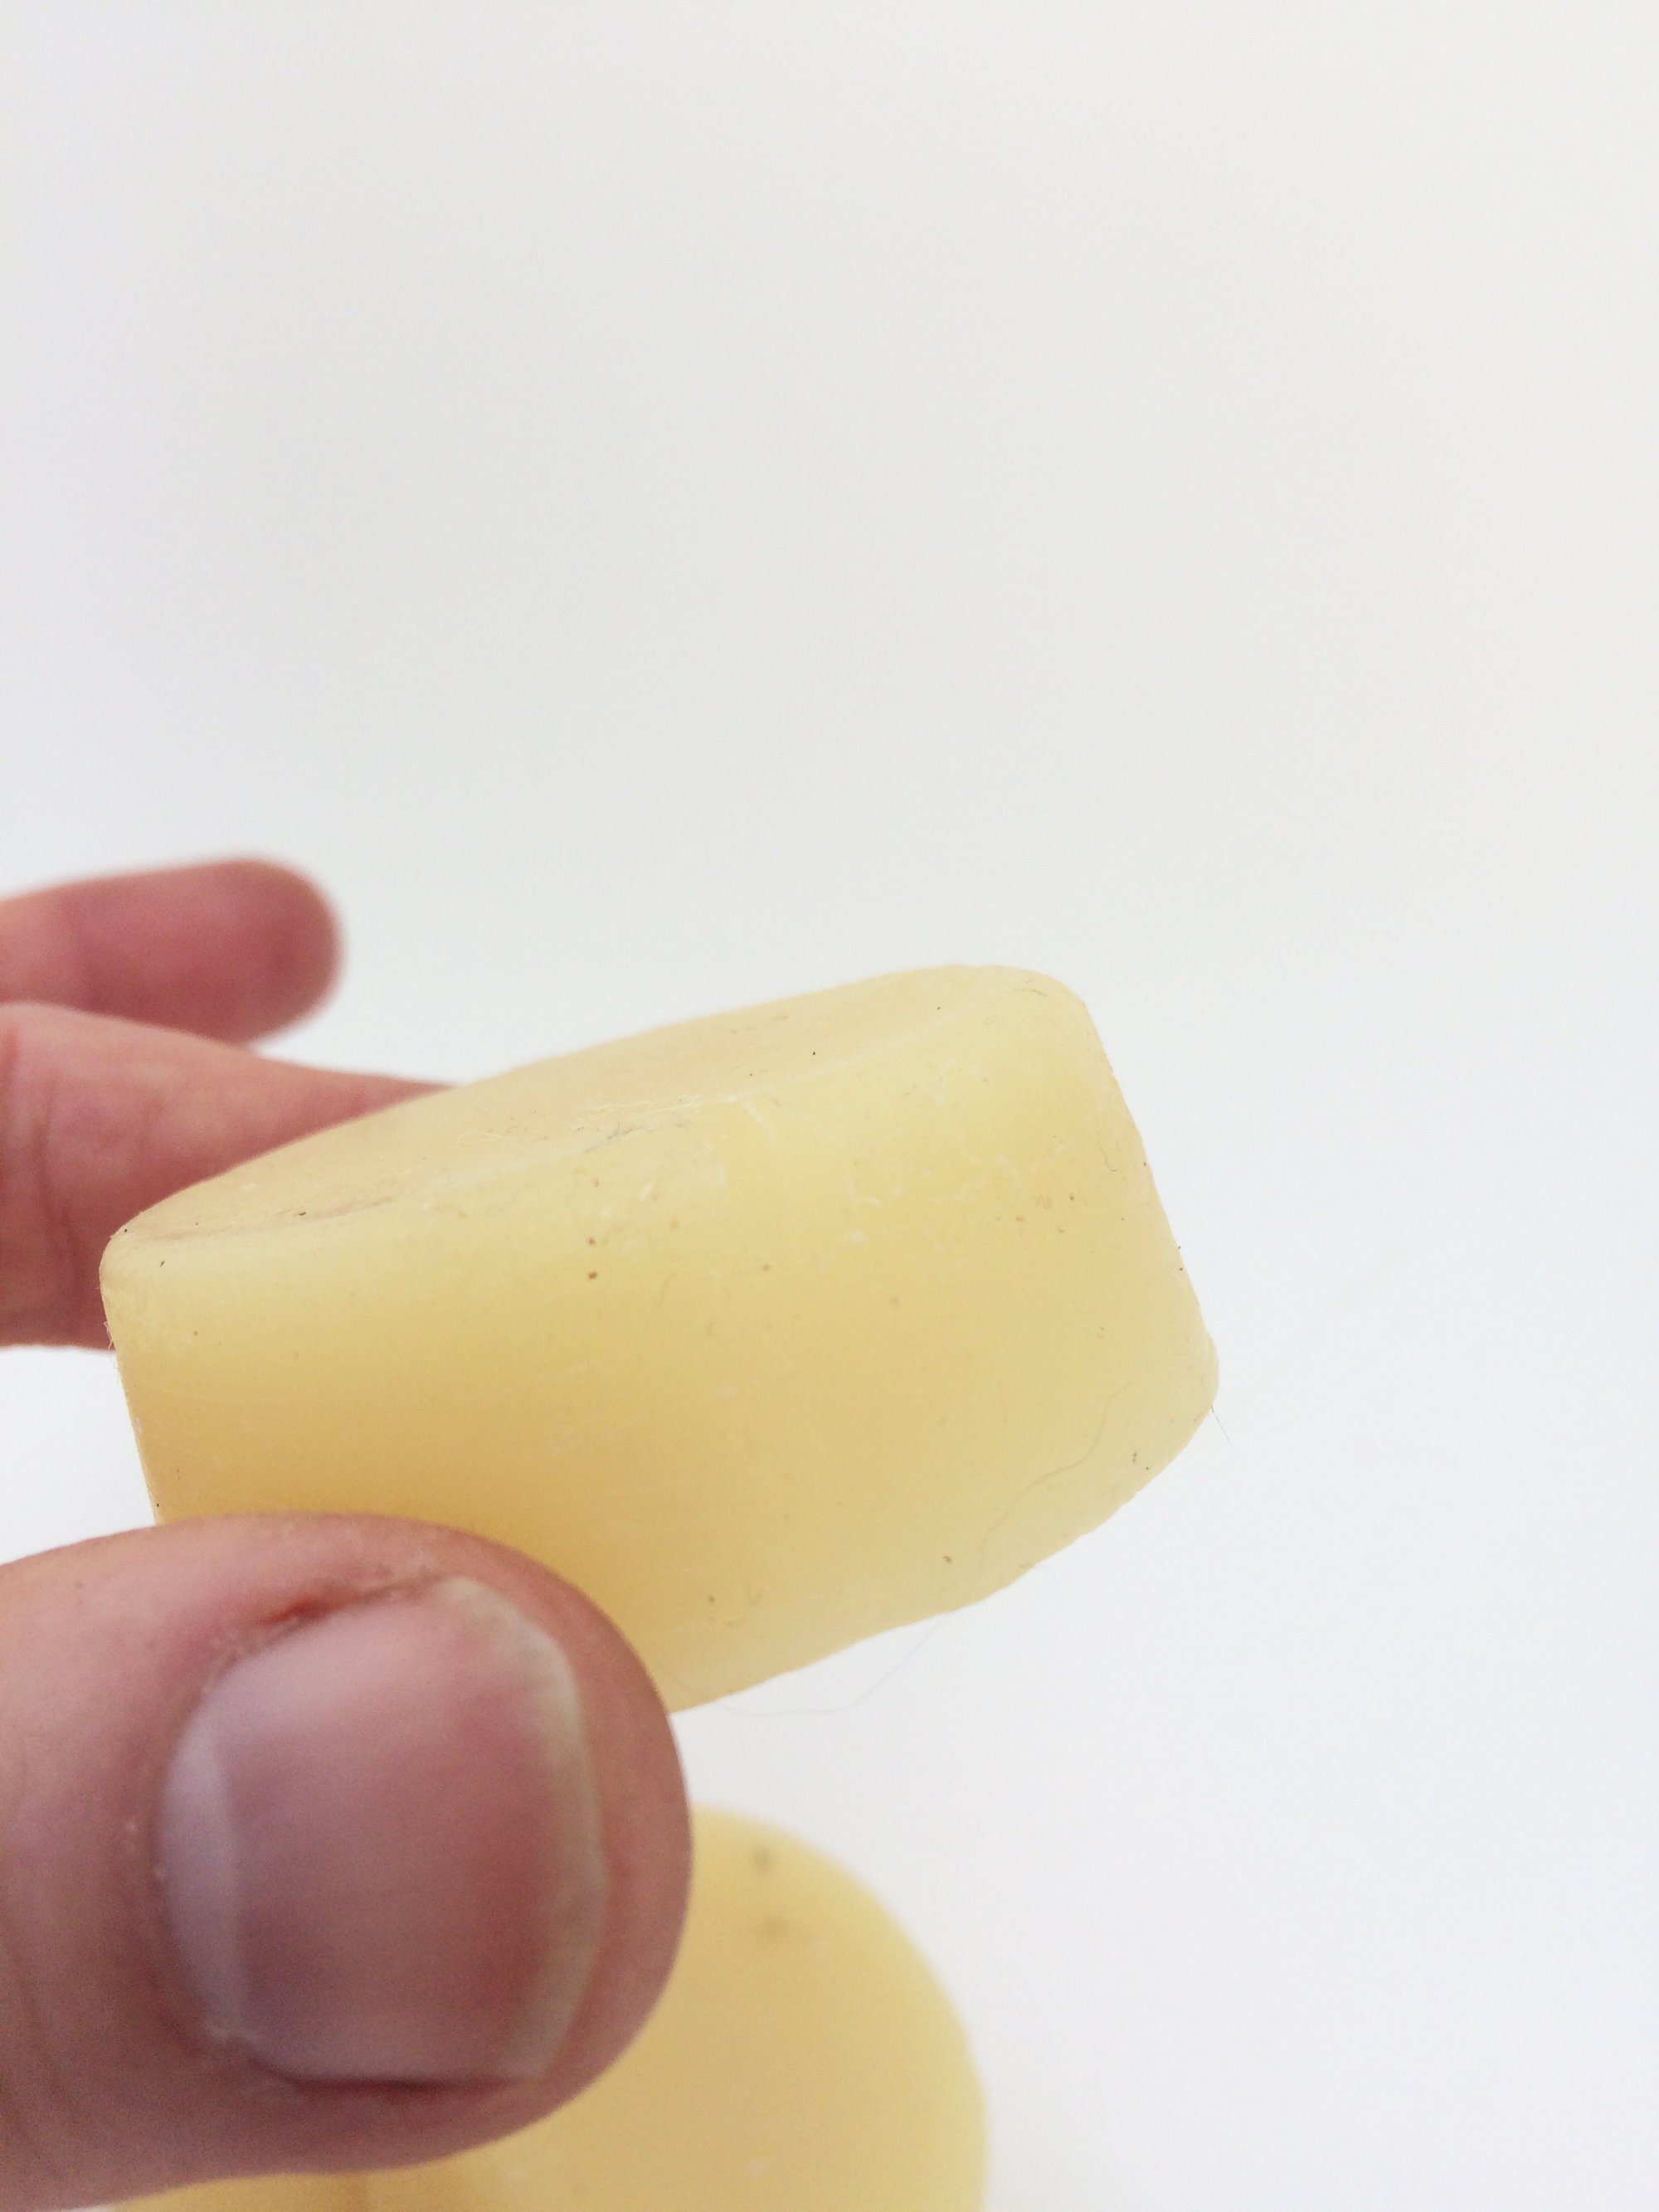 100% Beeswax Thread Conditioner, Beeswax for Thread (NO COCONUT OIL) smells  like perfume